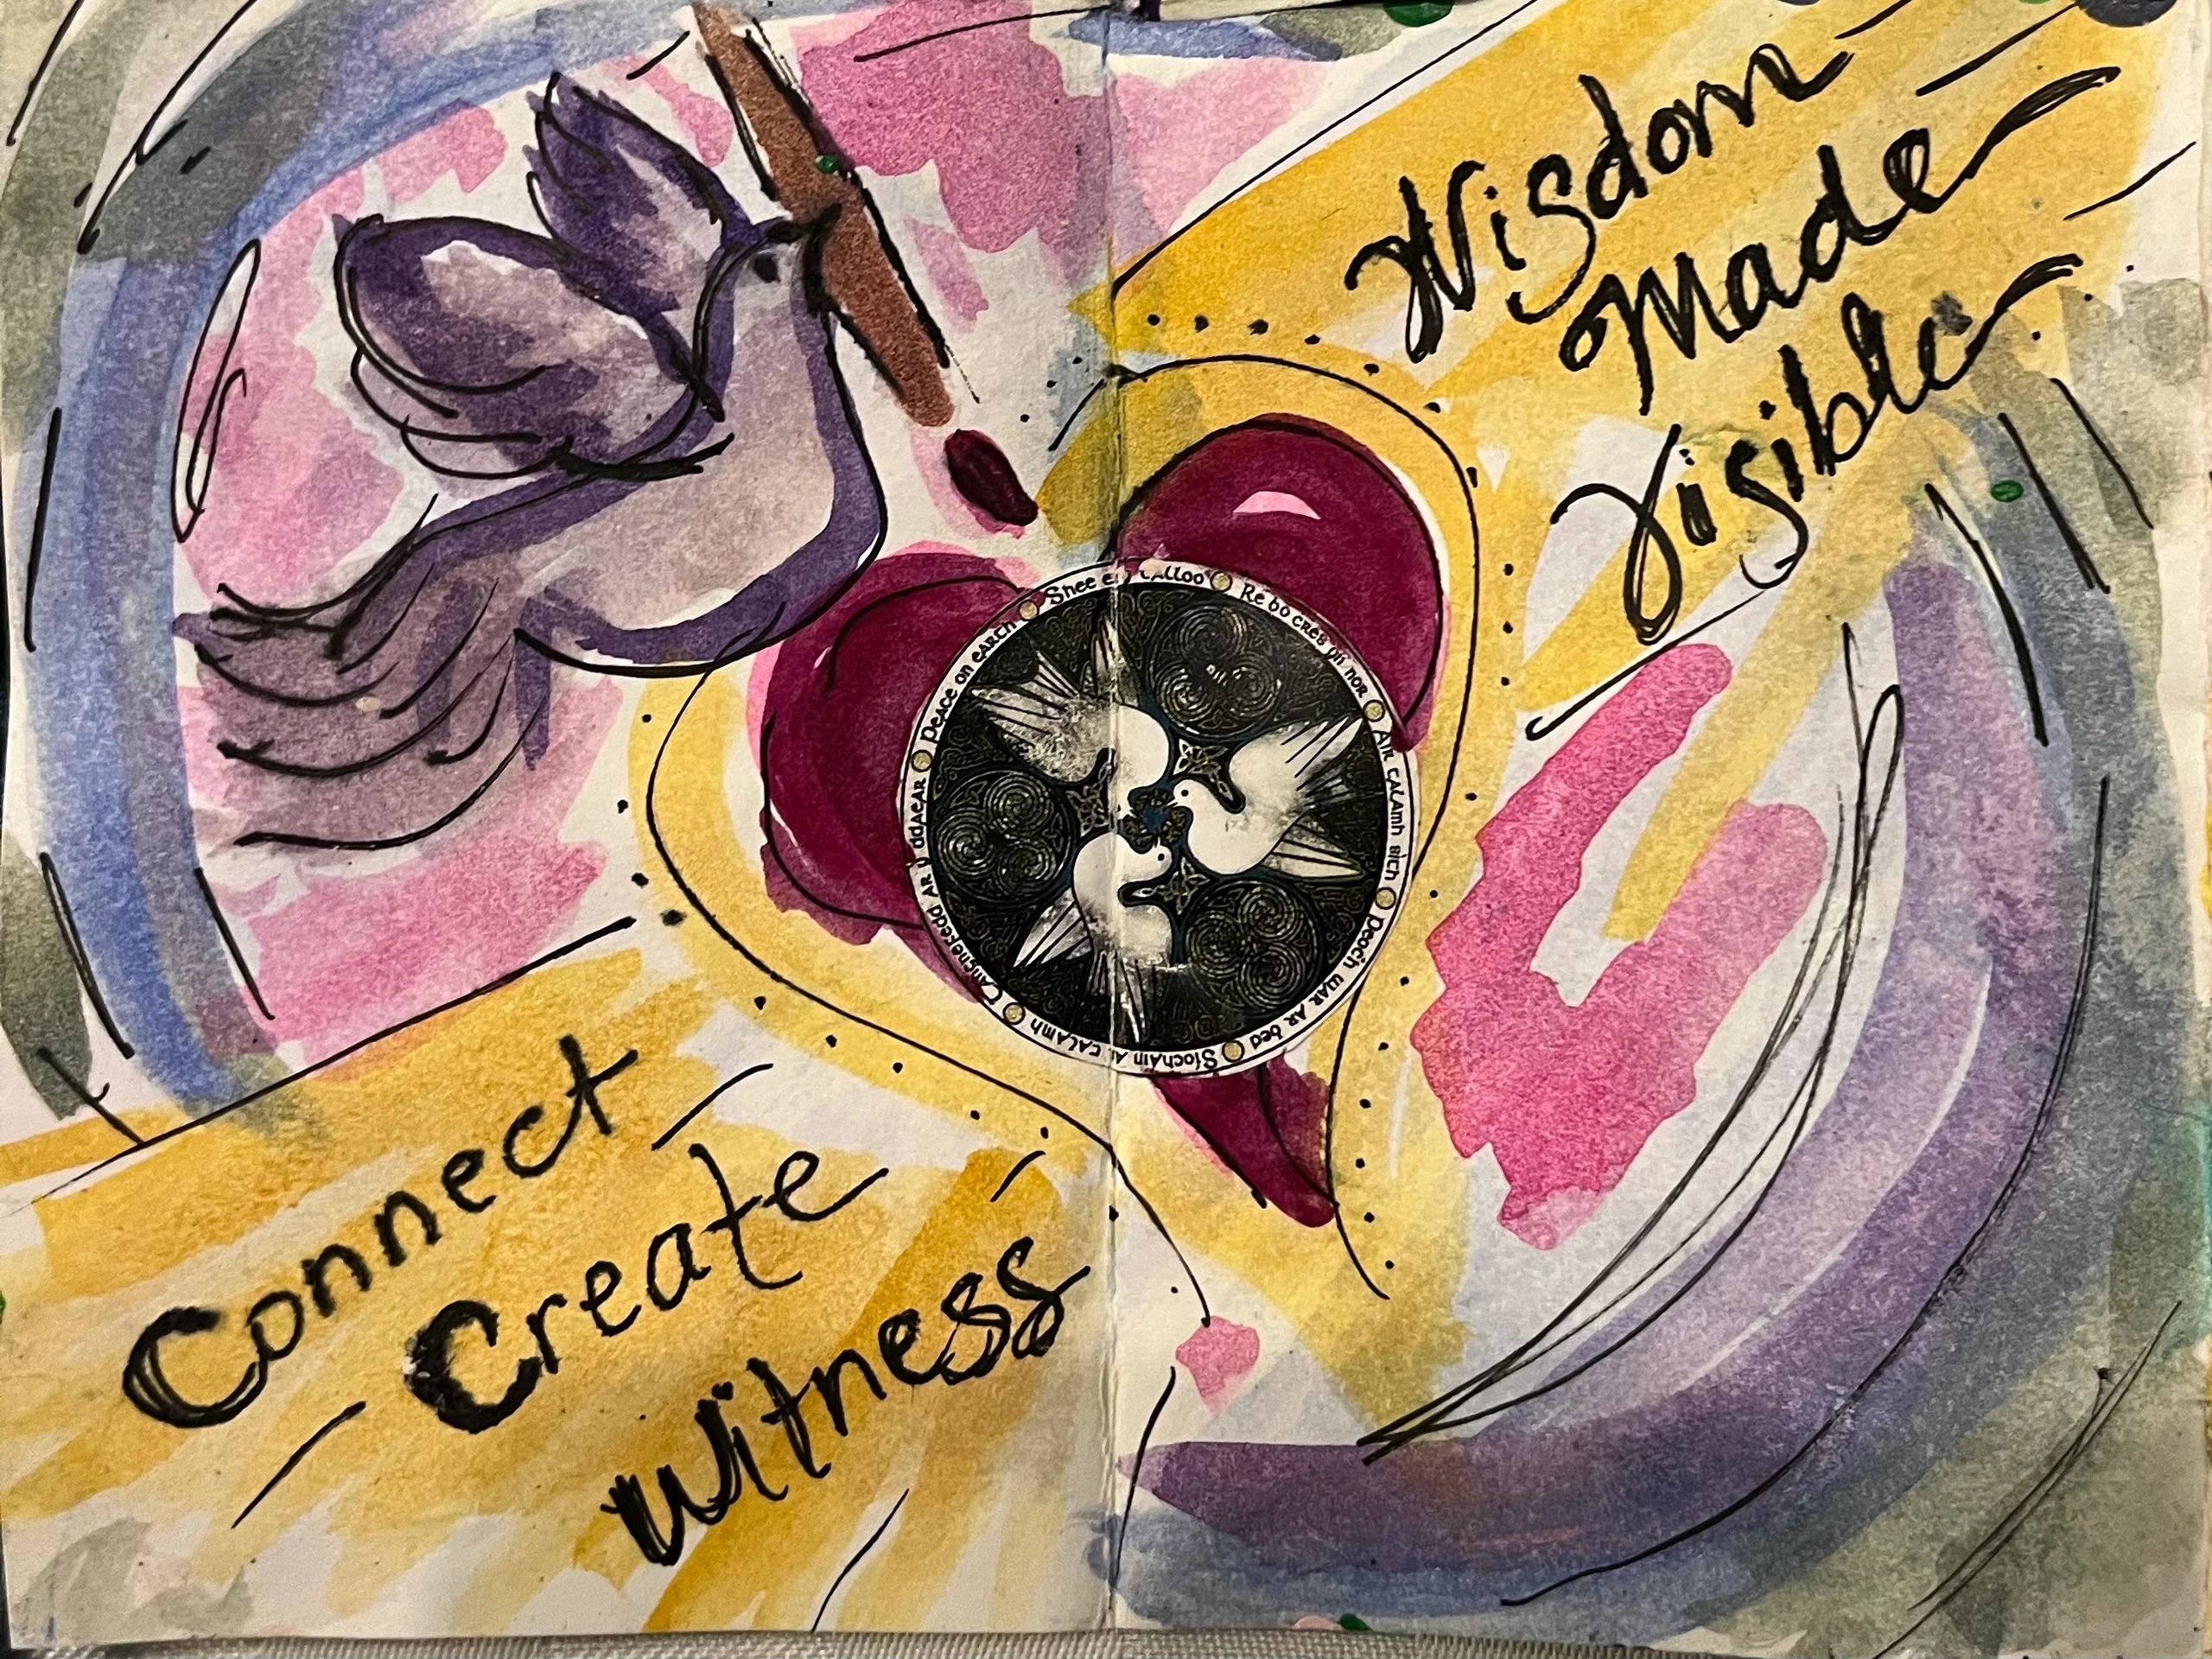 A colorful watercolor painting with connect, create, and witness words